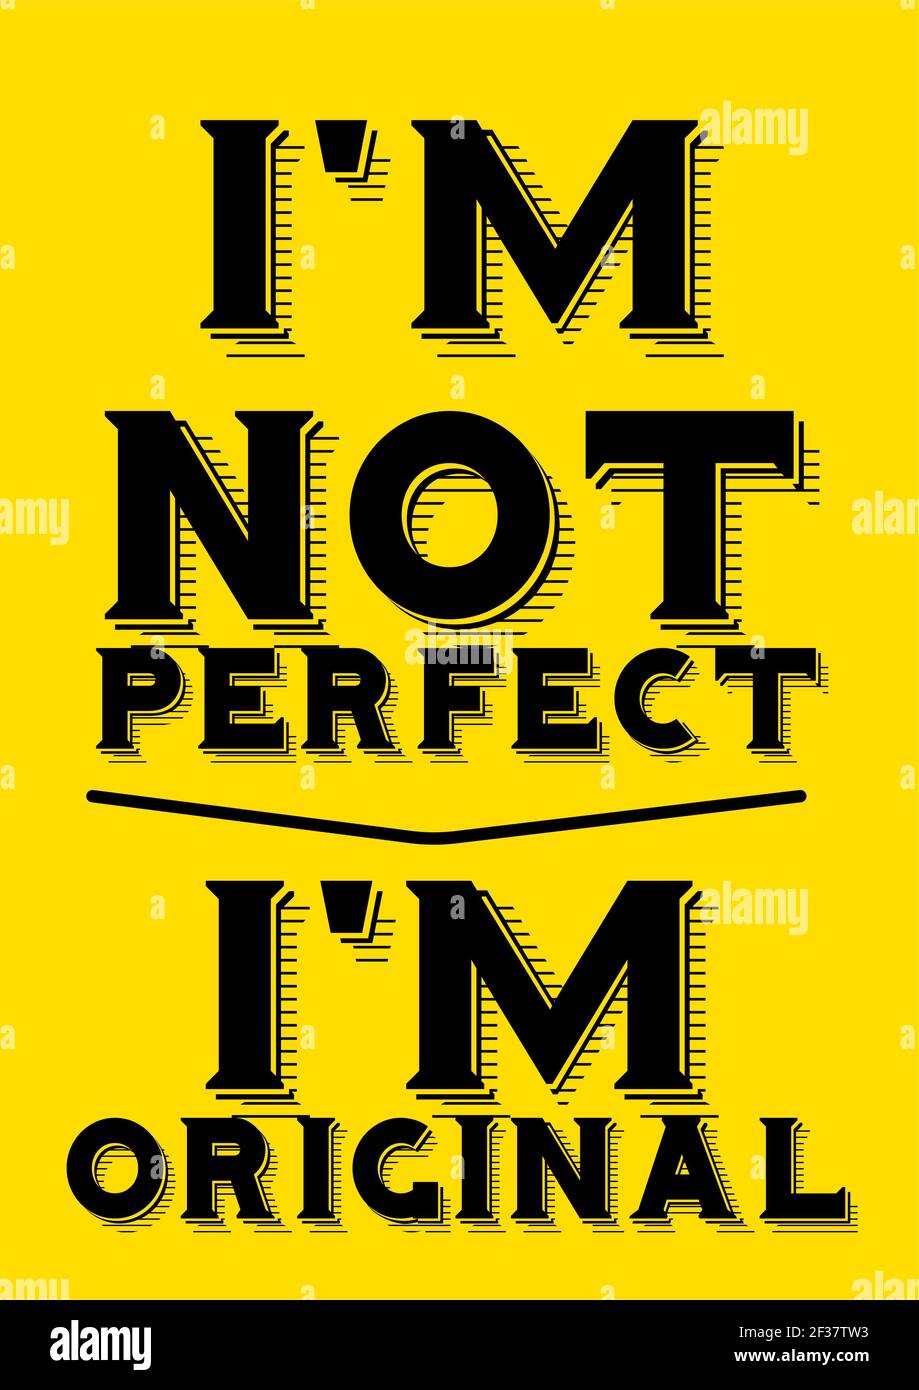 quotes about being perfect